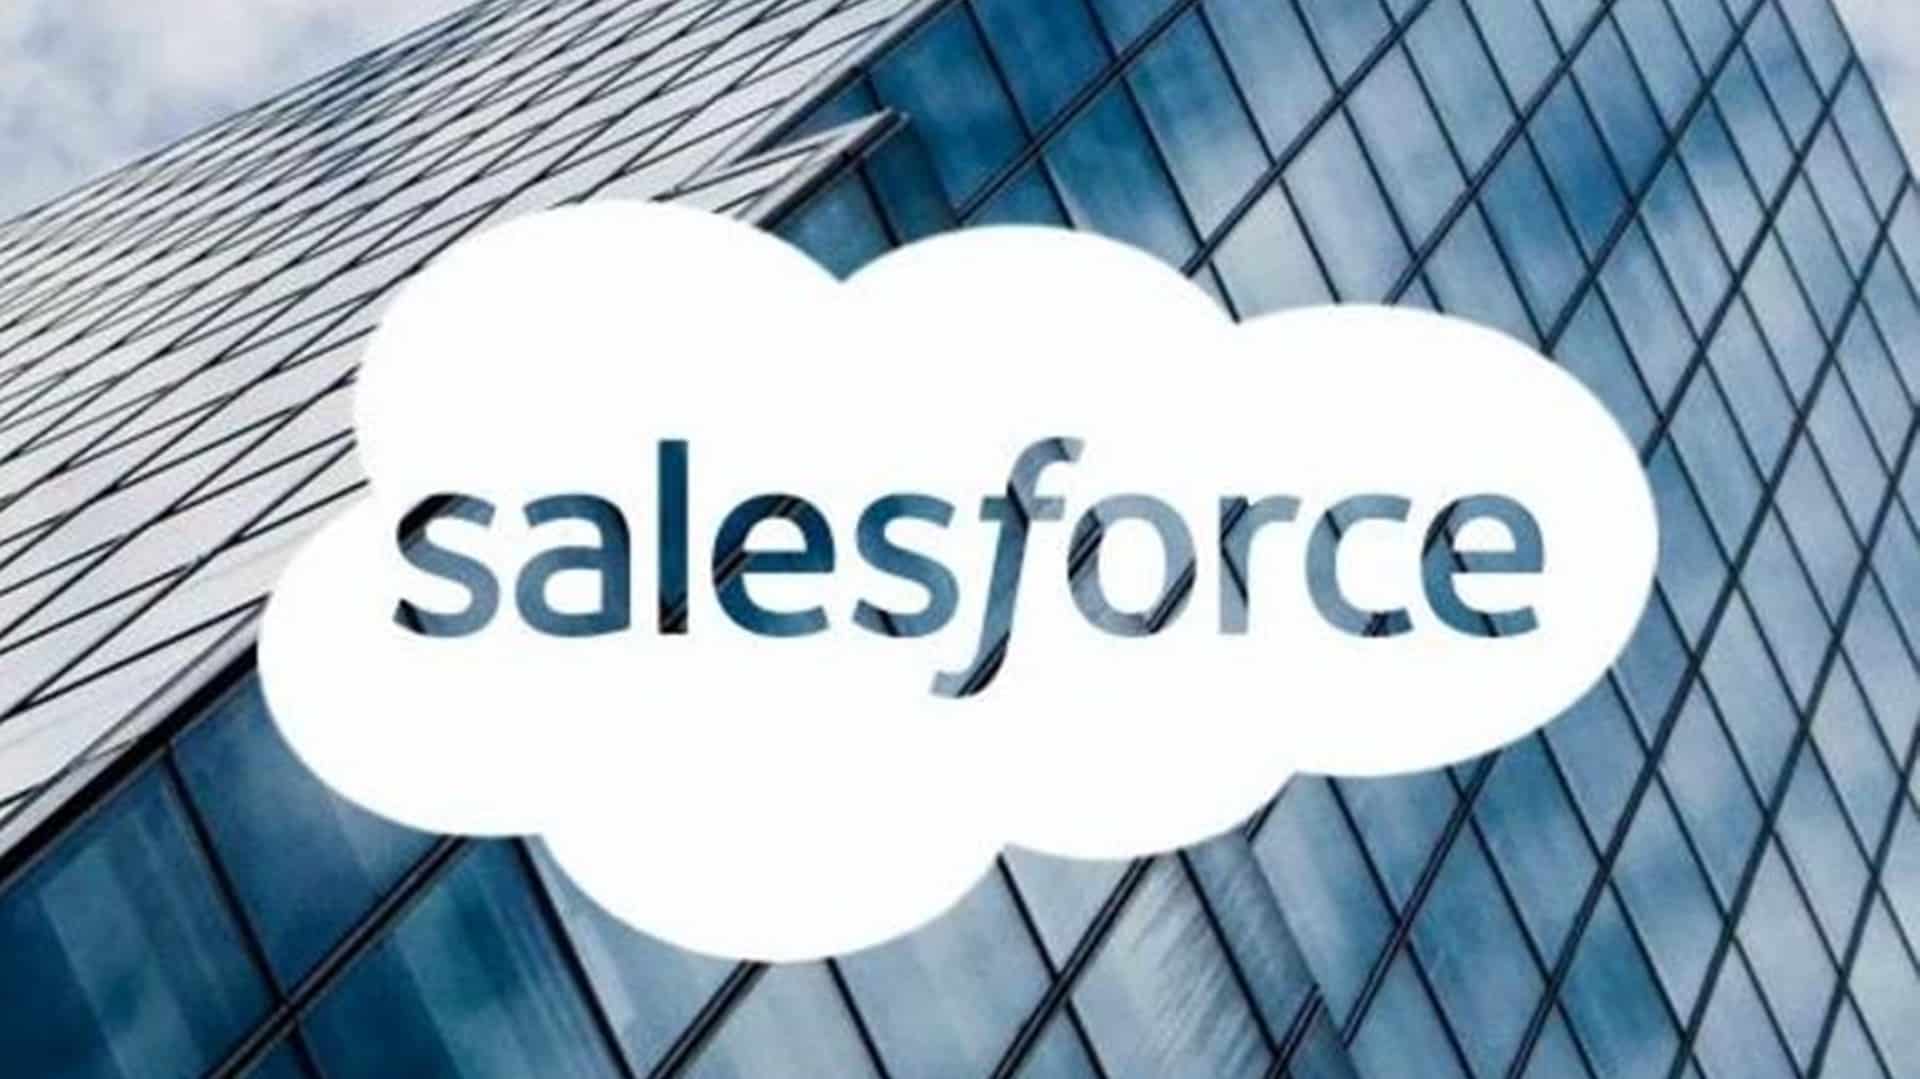 India a priority market, will continue to see growth here: Salesforce